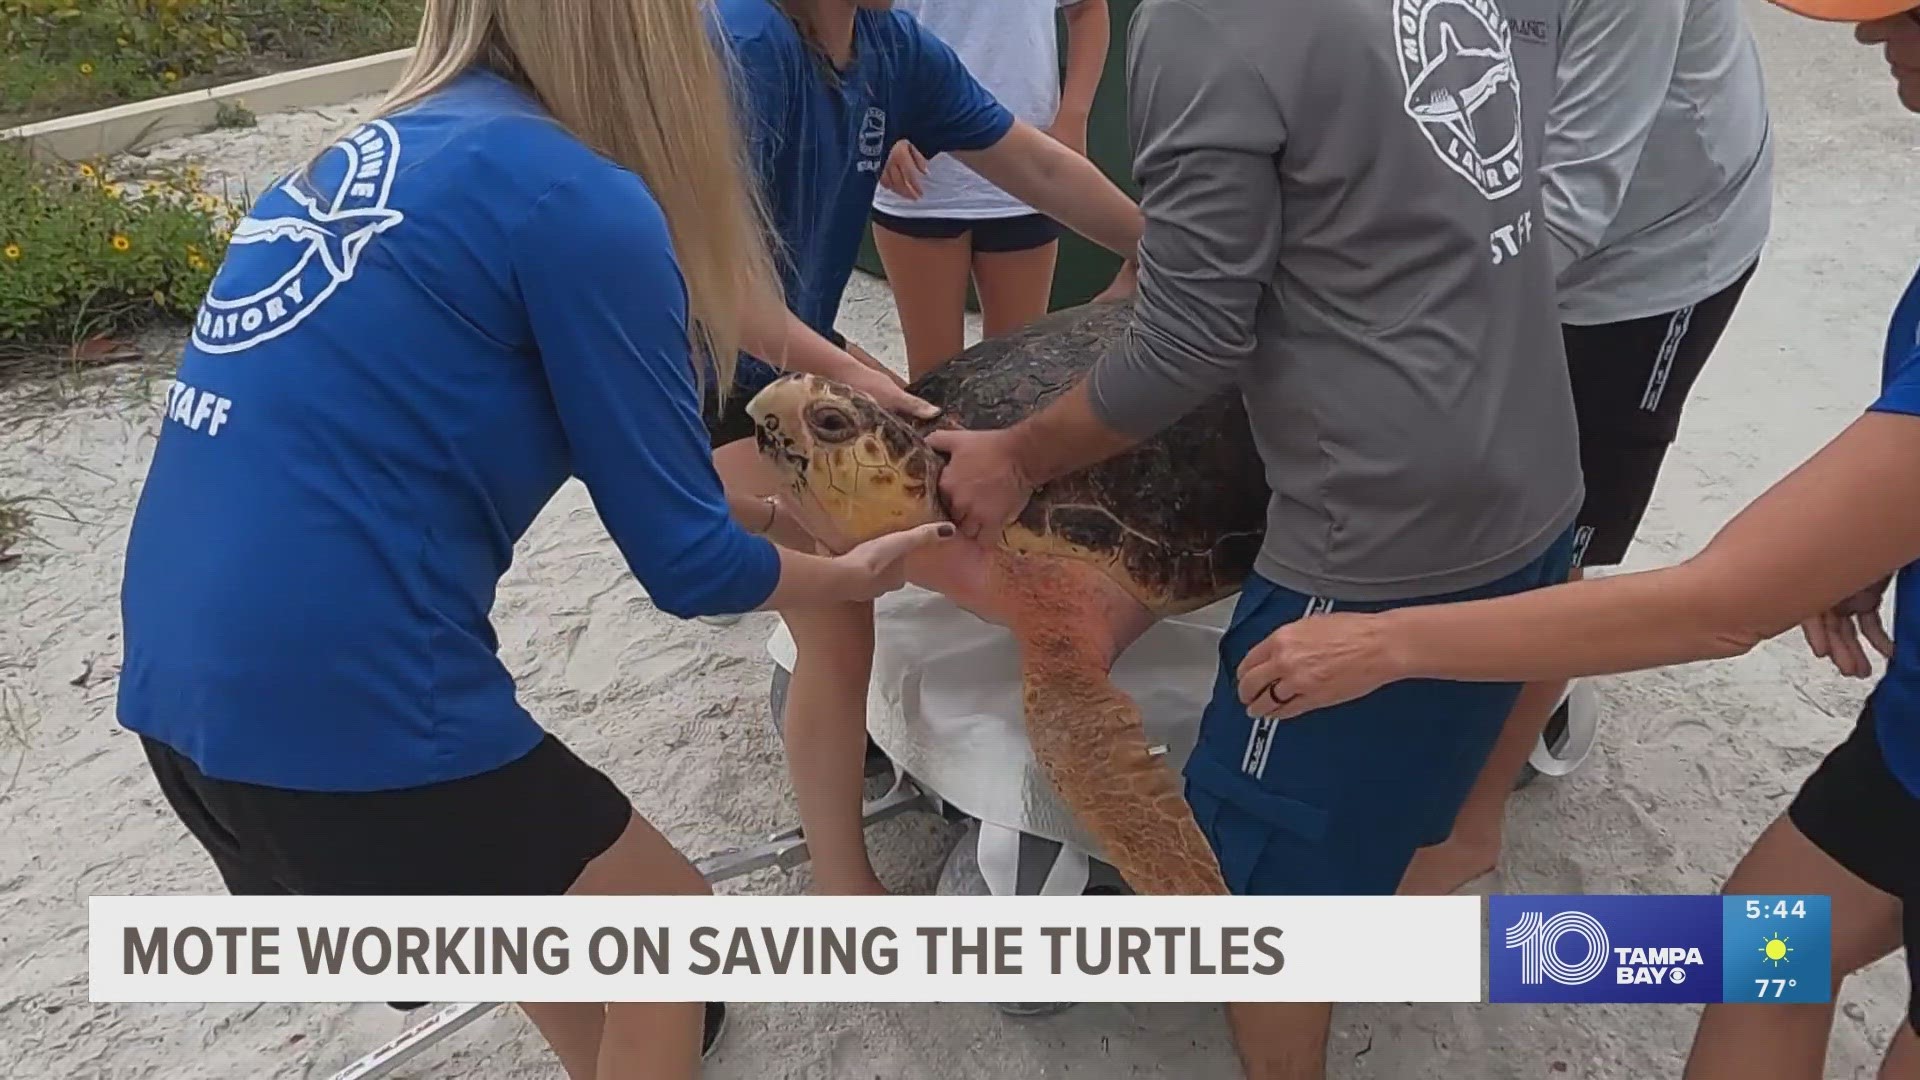 Mote's four-decade long study is showing major improvements in saving hundreds of turtles.